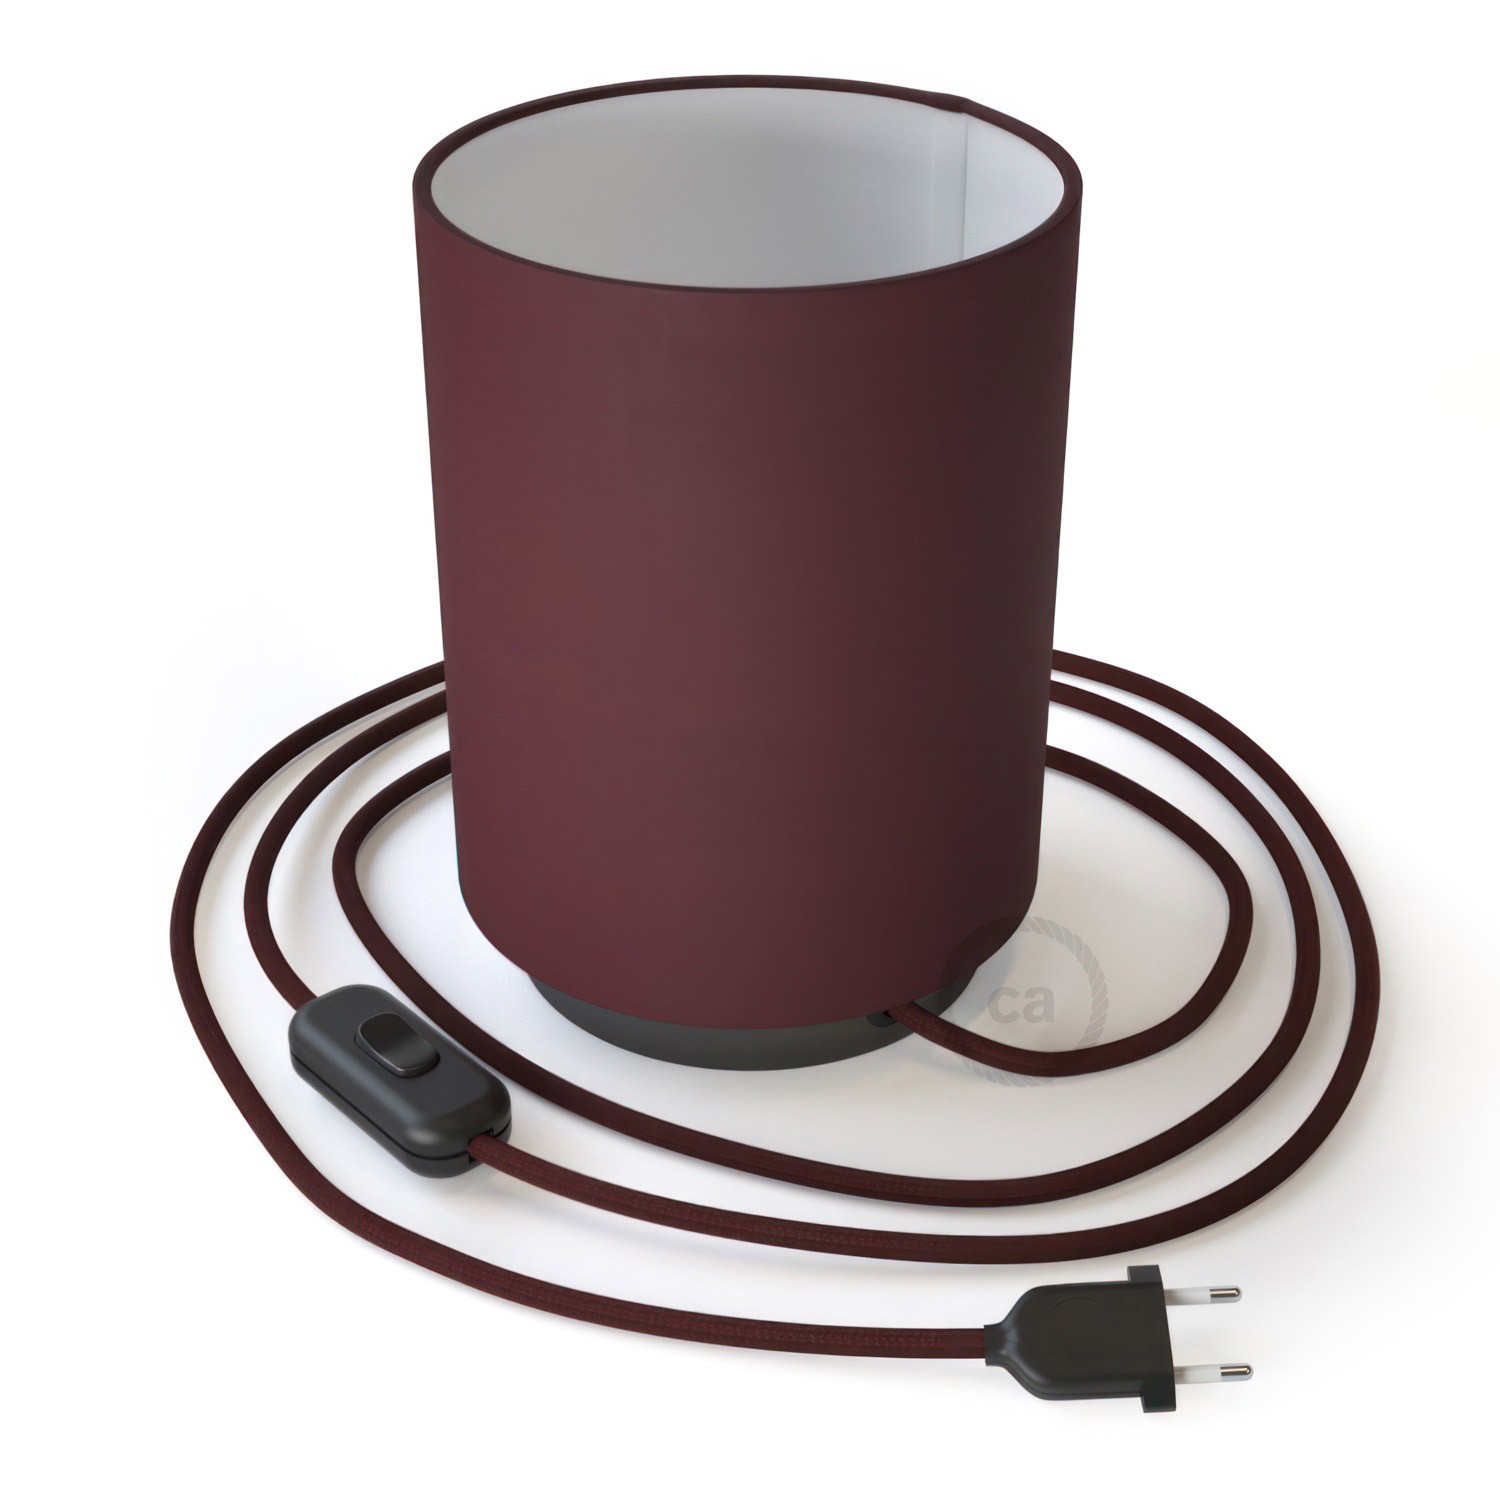 Posaluce in metal with Burgundy Canvas Cilindro lampshade, complete with fabric cable, switch and 2-pin plug